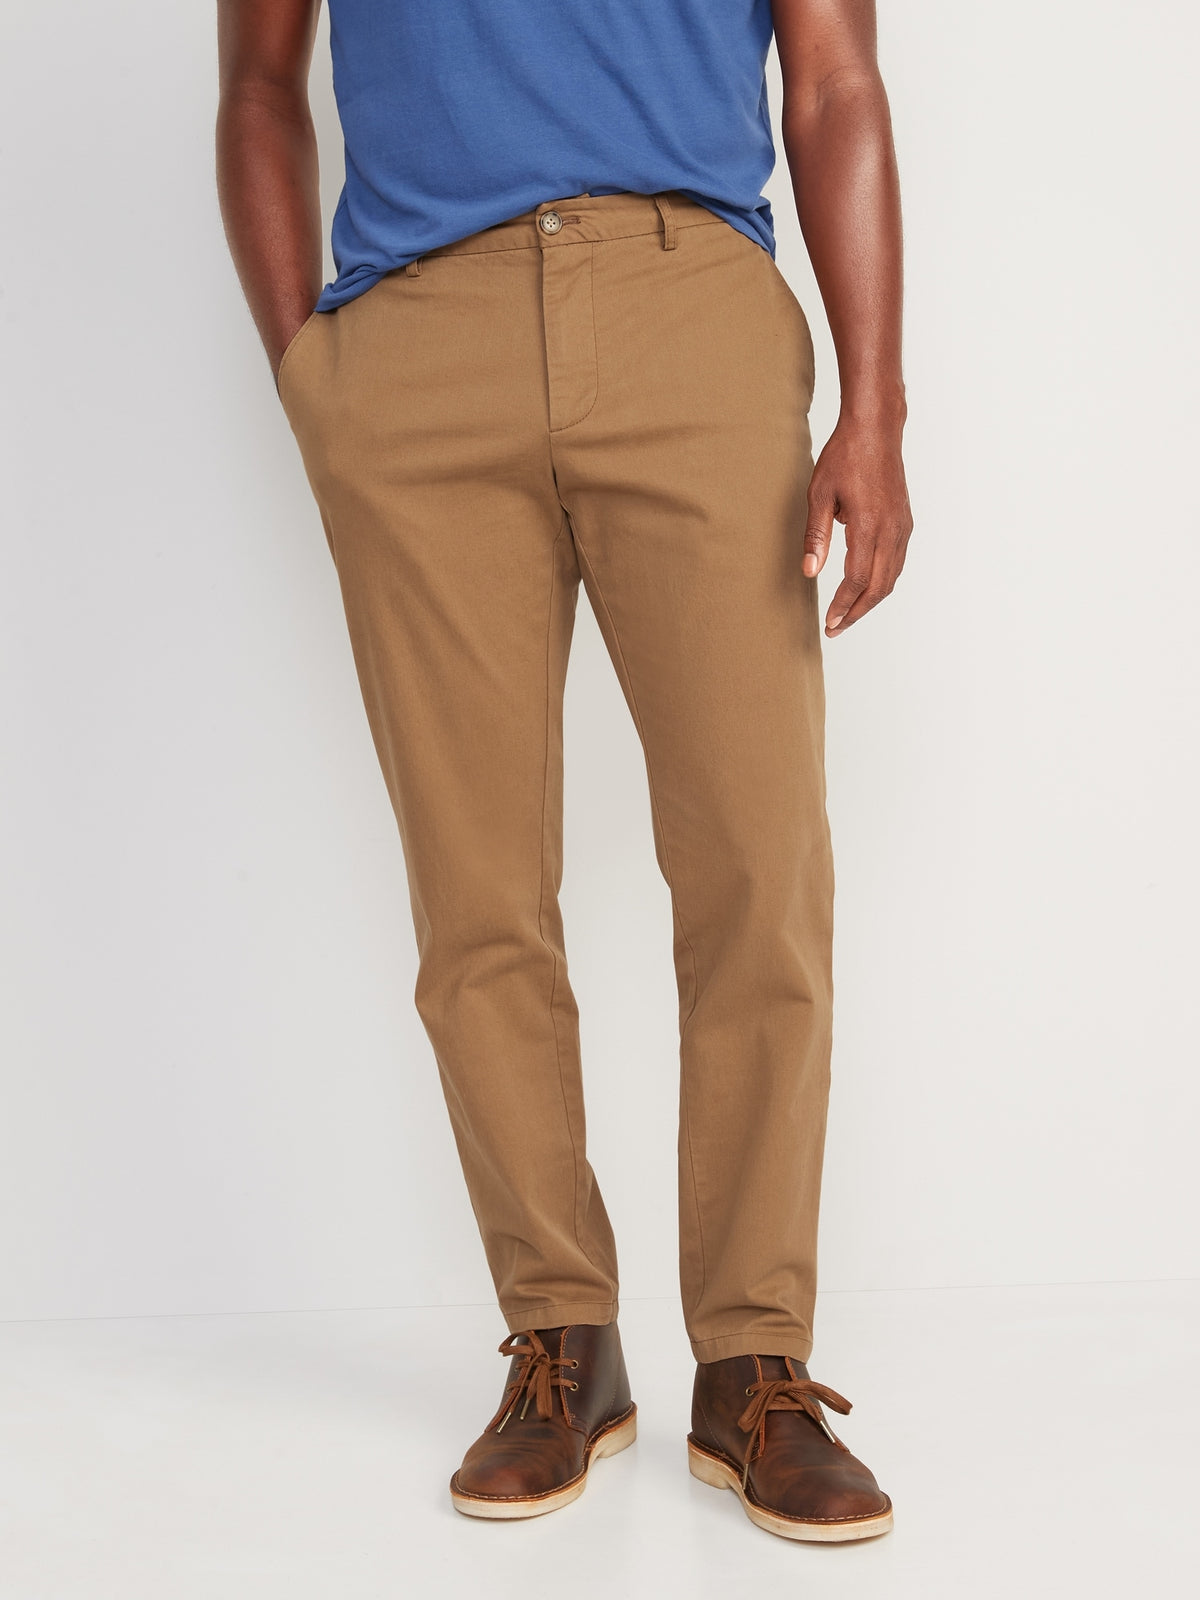 Flex Rotation Chino Pants for Men - Old Navy Philippines